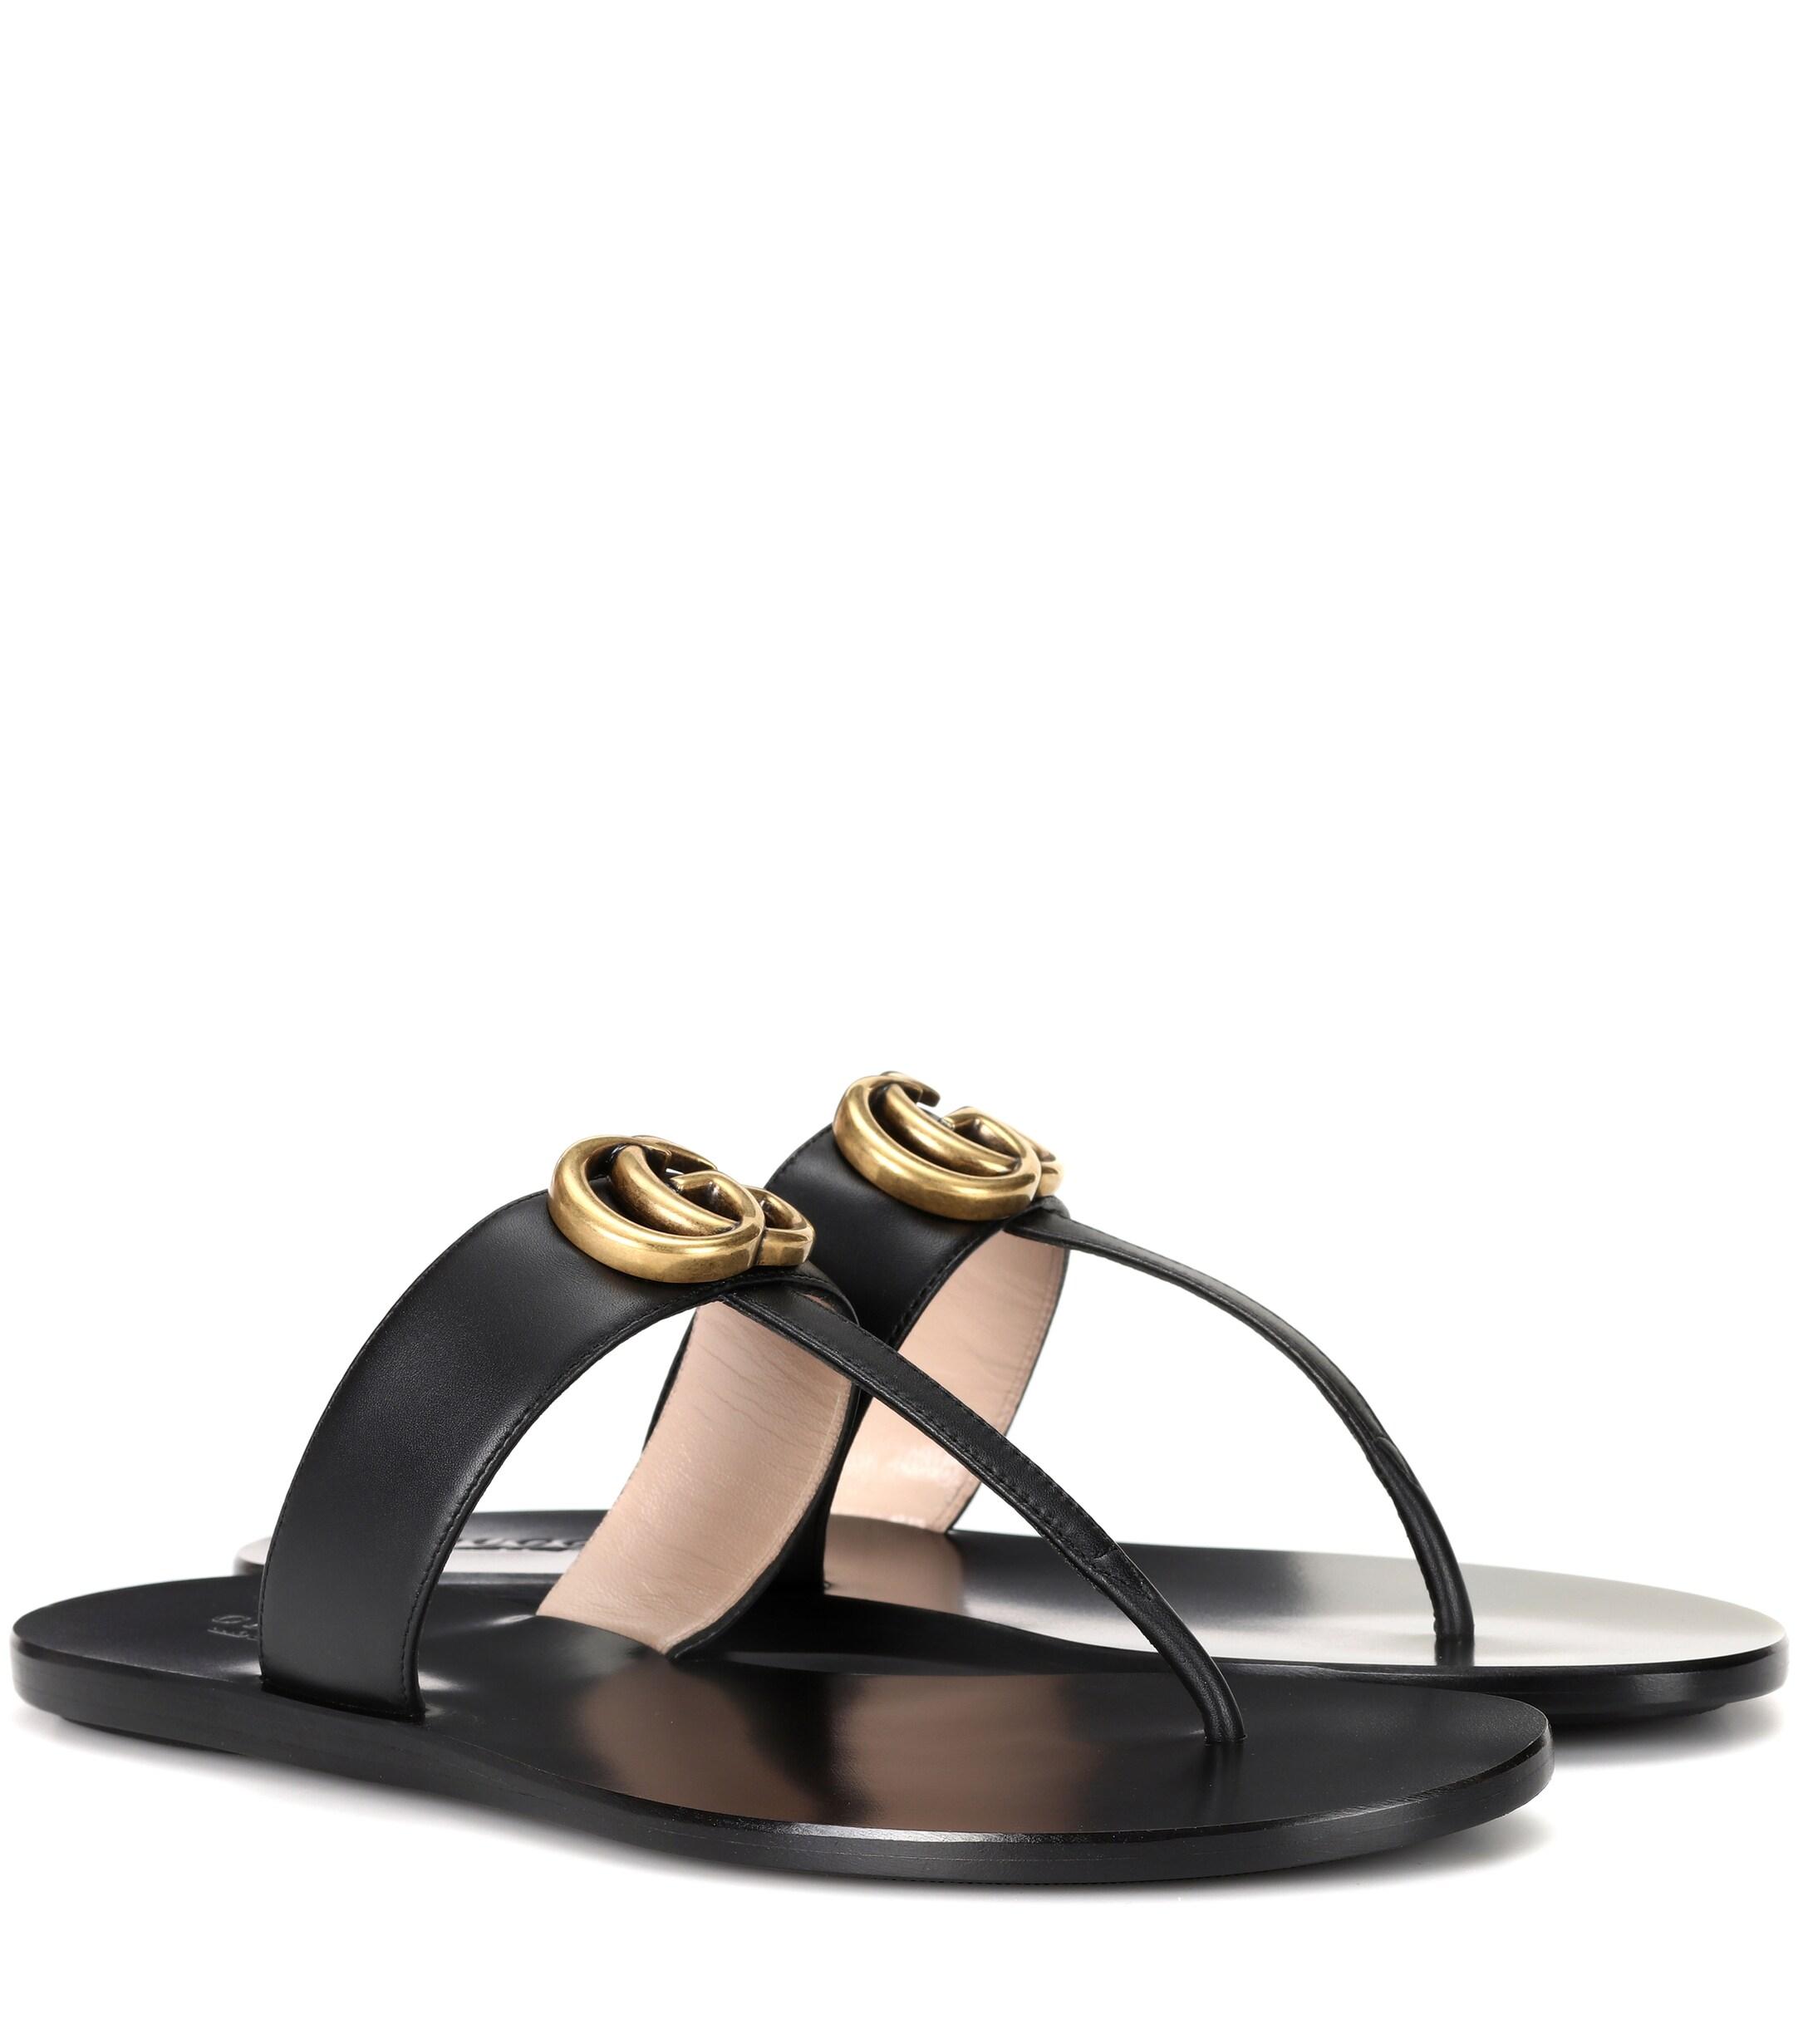 Gucci Marmont Leather Sandals in Black - Lyst